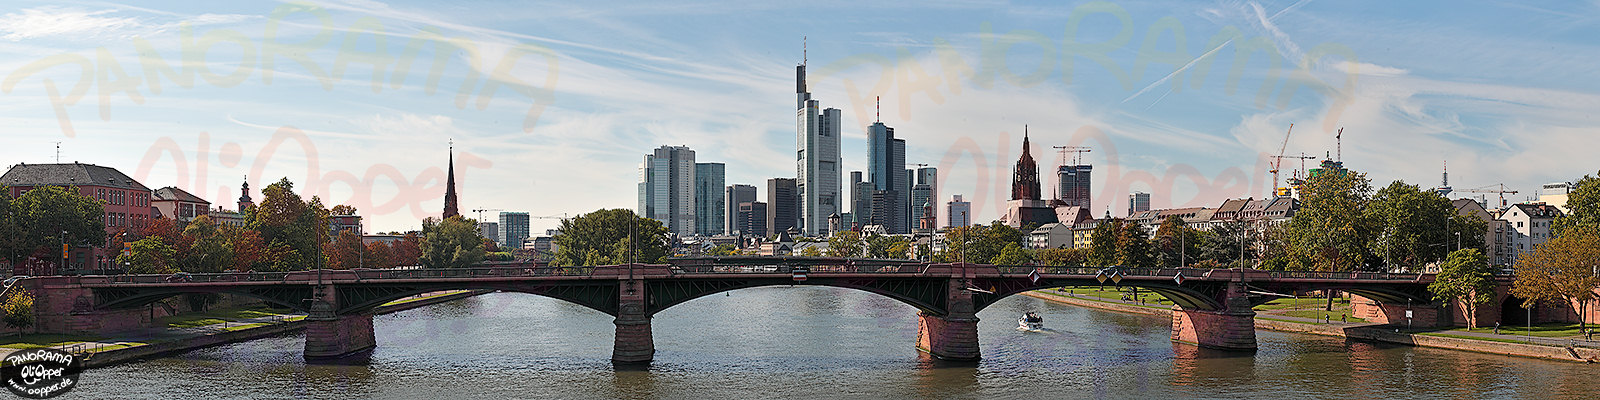 Panorama Frankfurt - Skyline am Tag - p299 - (c) by Oliver Opper